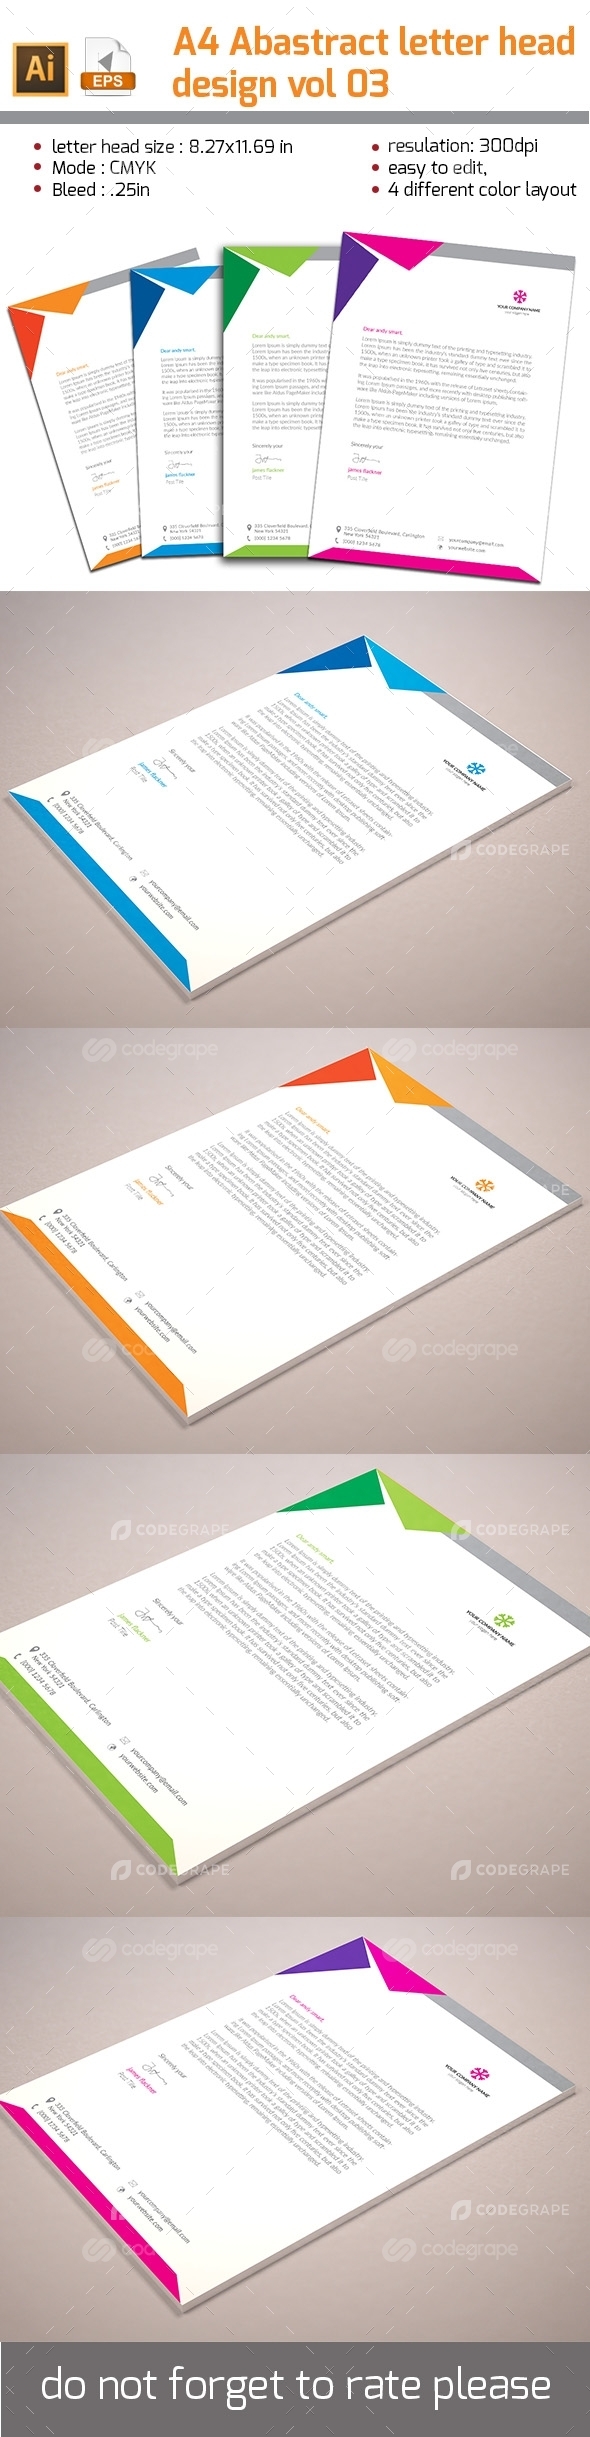 Abstract Letter Head Design vol 03